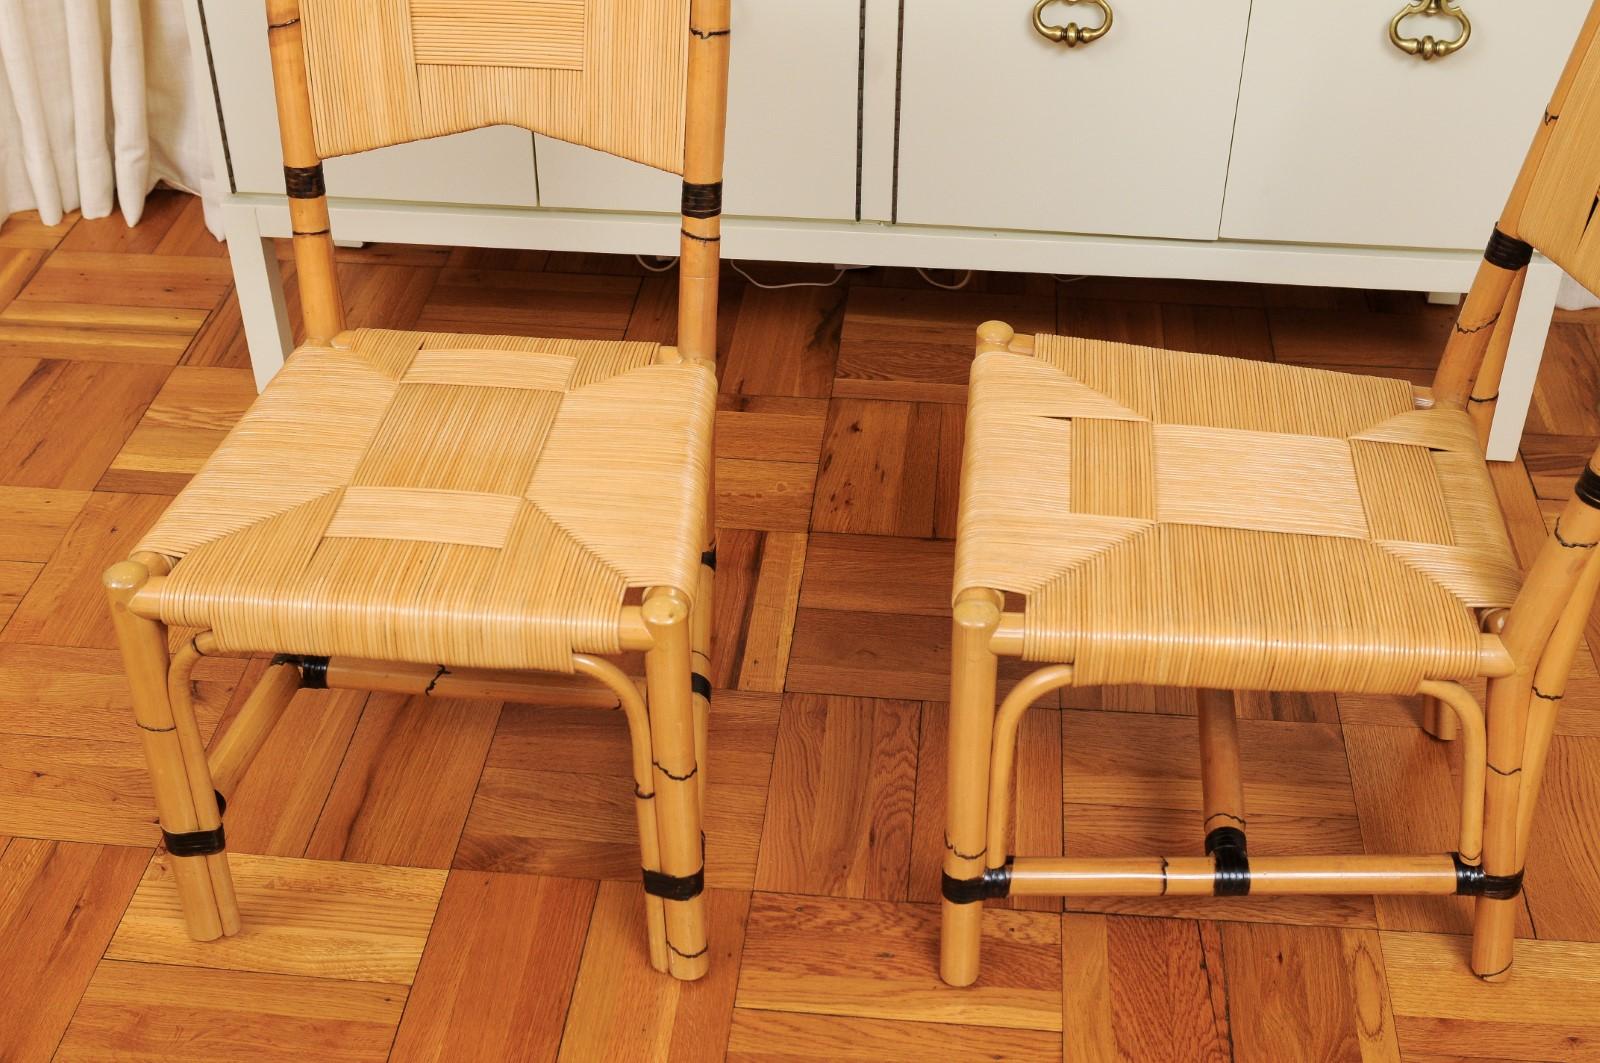 Superb Set of 8 Rush Rattan Dining Chairs by John Hutton for Donghia, circa 1995 For Sale 8